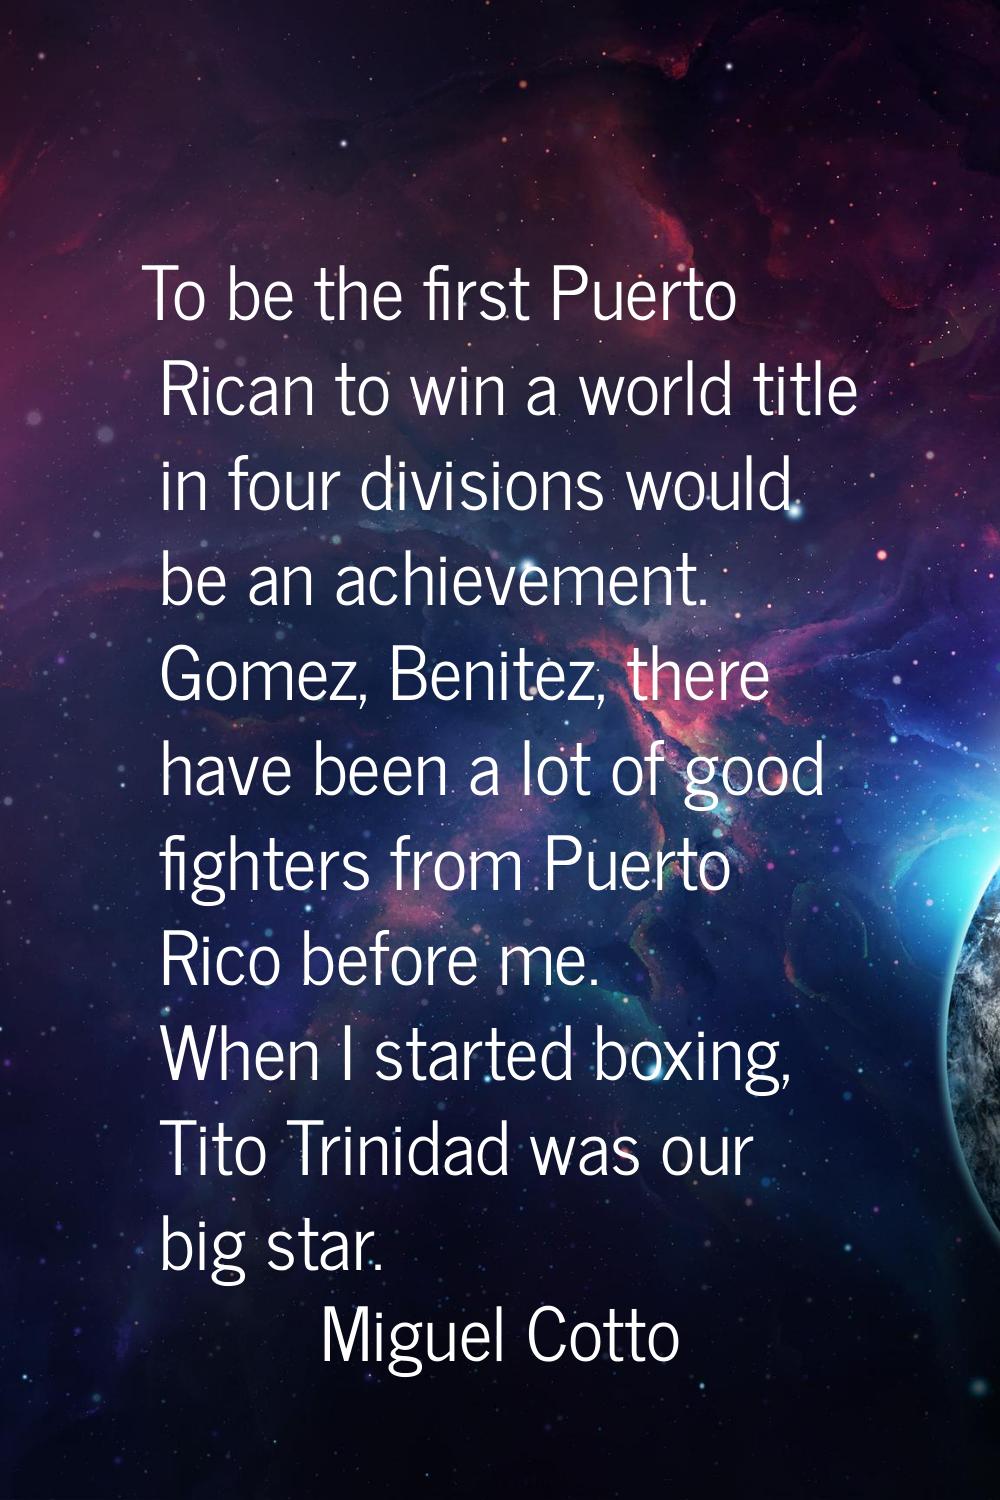 To be the first Puerto Rican to win a world title in four divisions would be an achievement. Gomez,